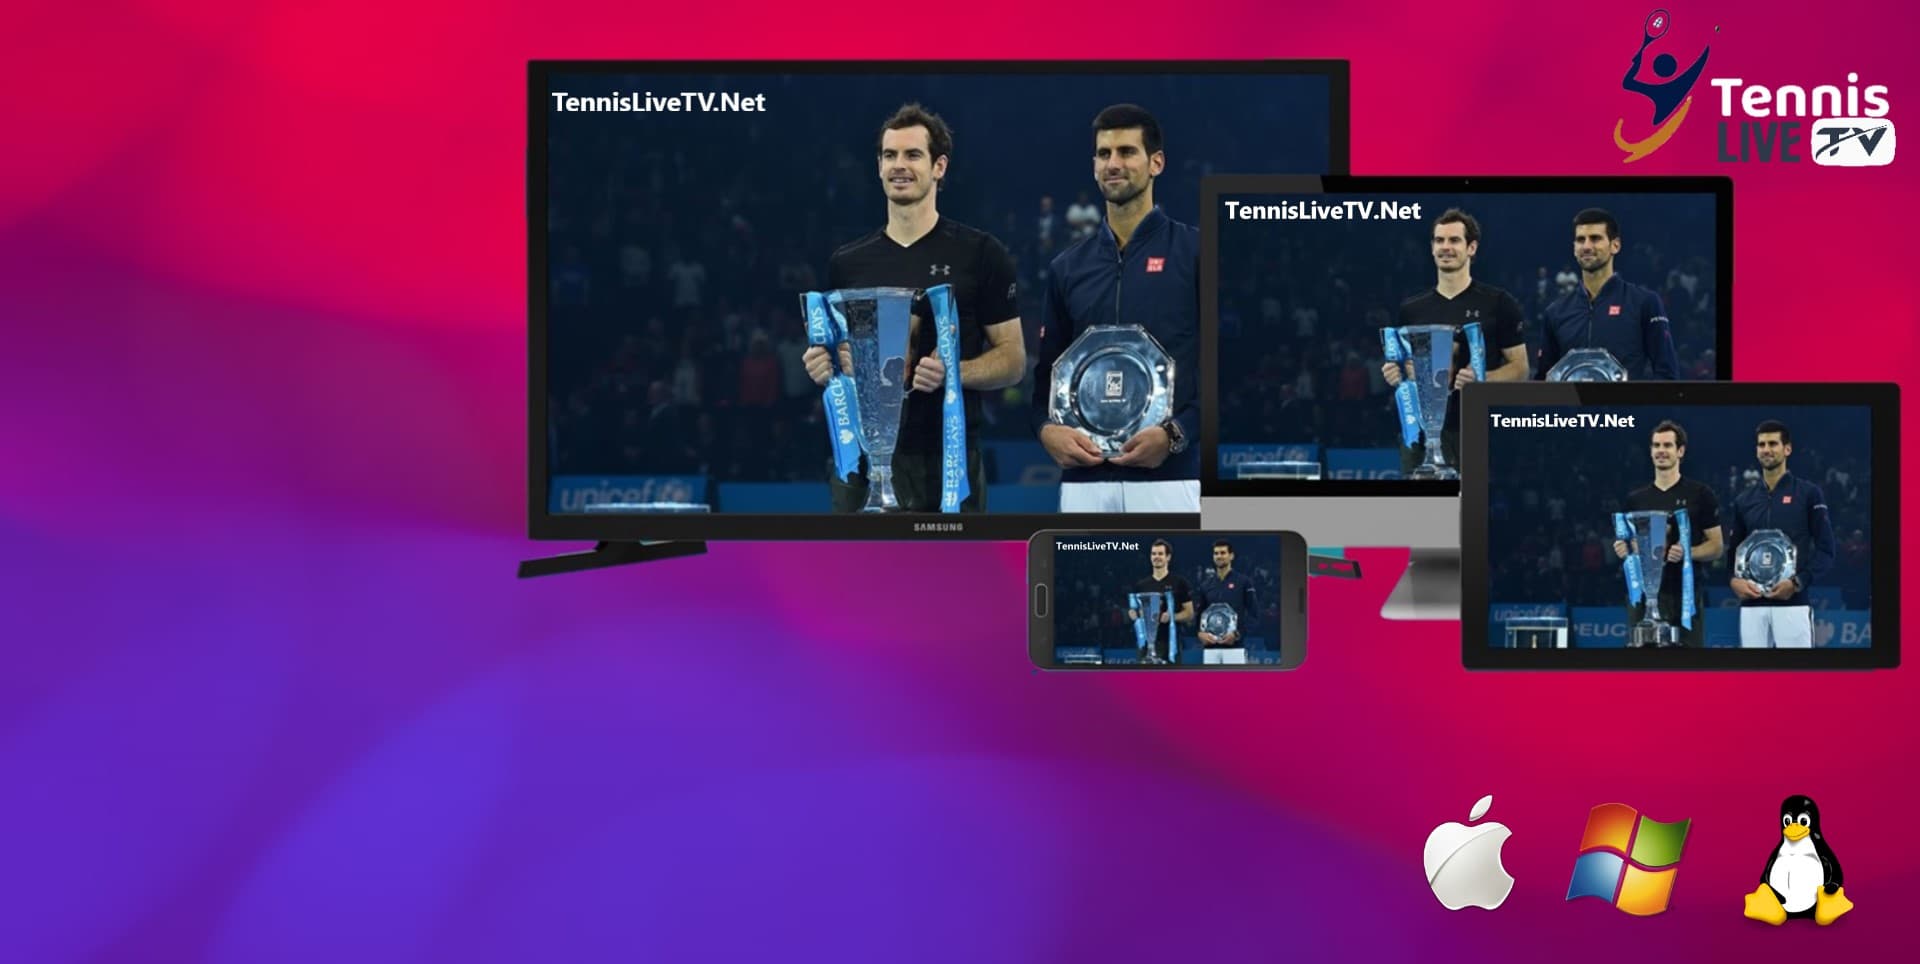 Where can I legally buy and download/stream full videos of pro tennis matches?